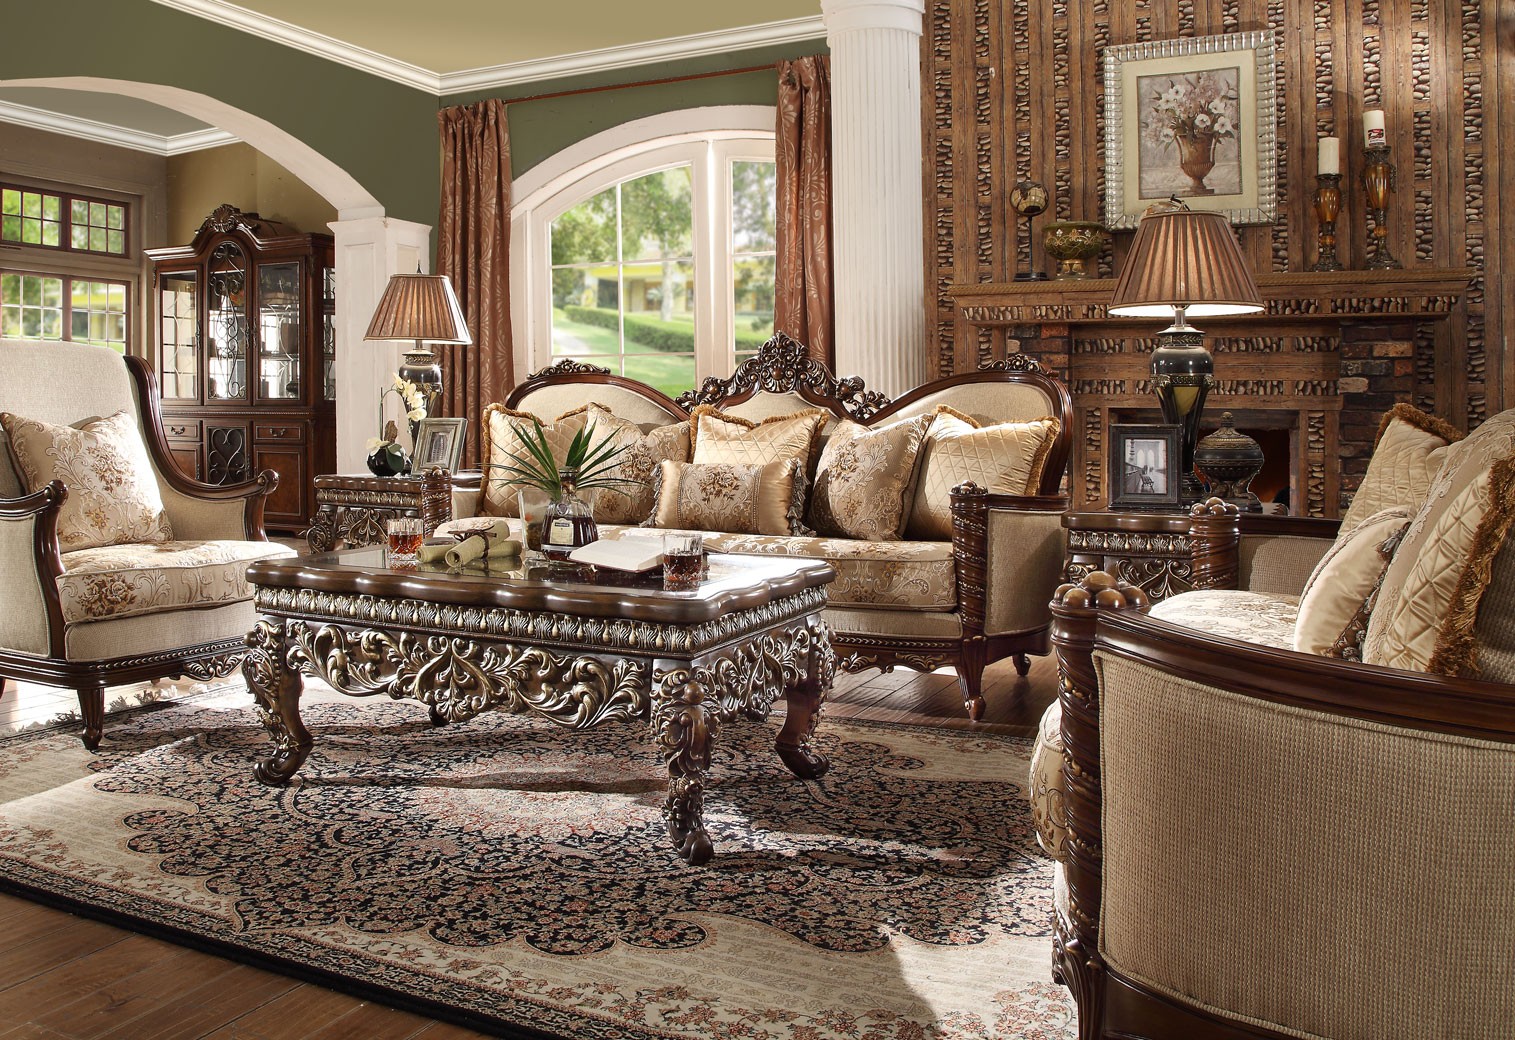 Traditional Living Room Furniture: Classic Pieces For A Timeless Look